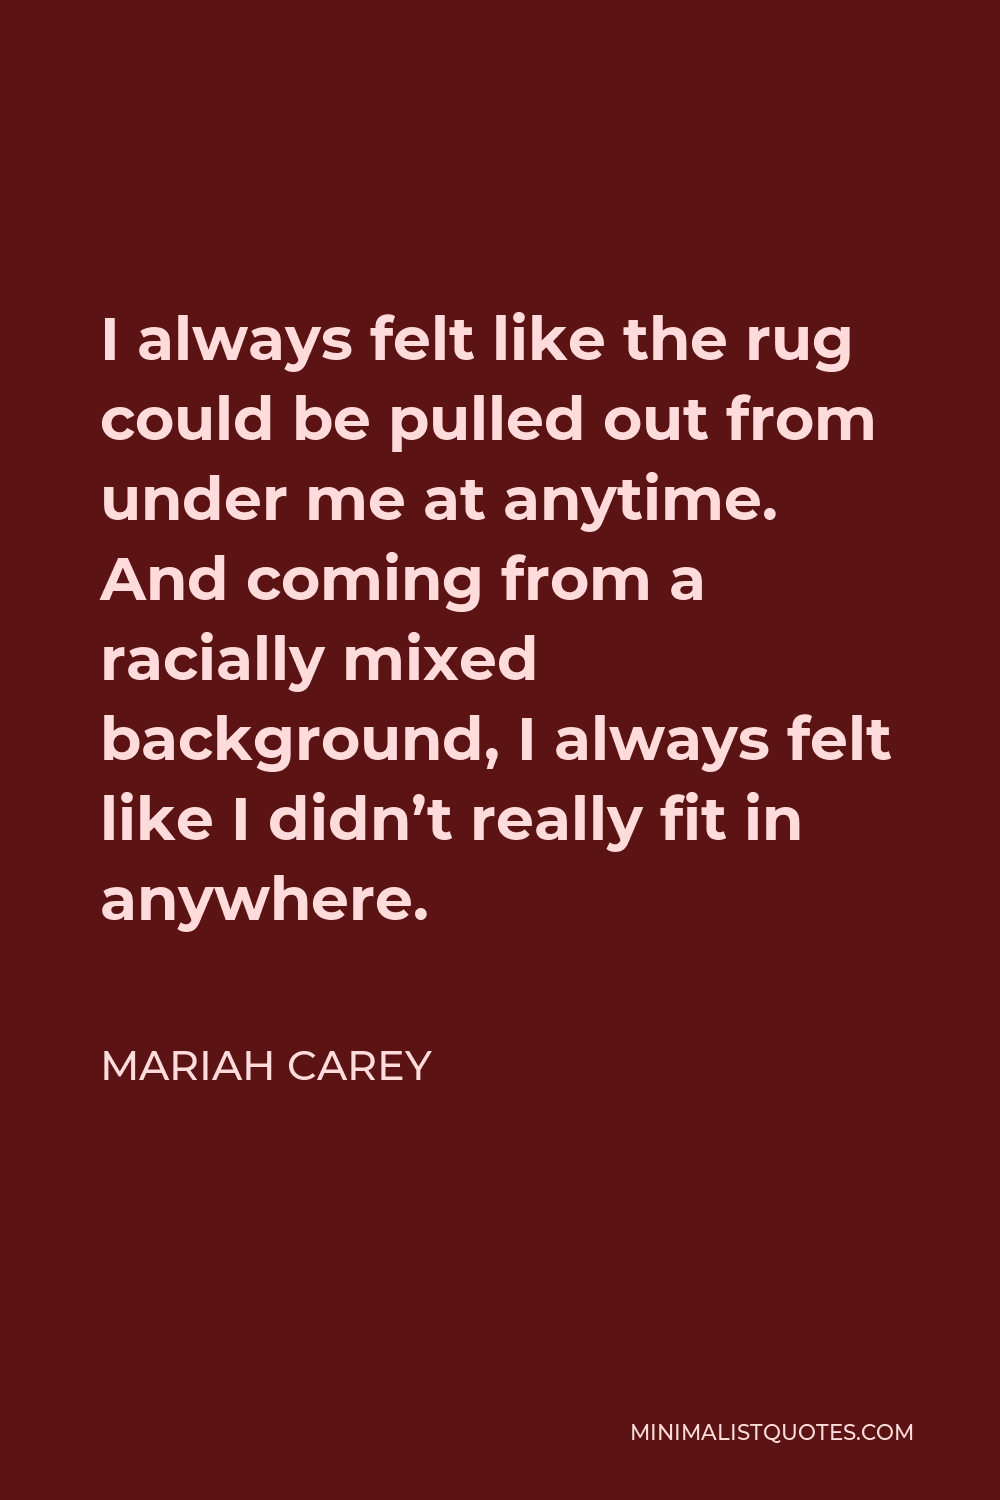 Mariah Carey Quote - I always felt like the rug could be pulled out from under me at anytime. And coming from a racially mixed background, I always felt like I didn’t really fit in anywhere.